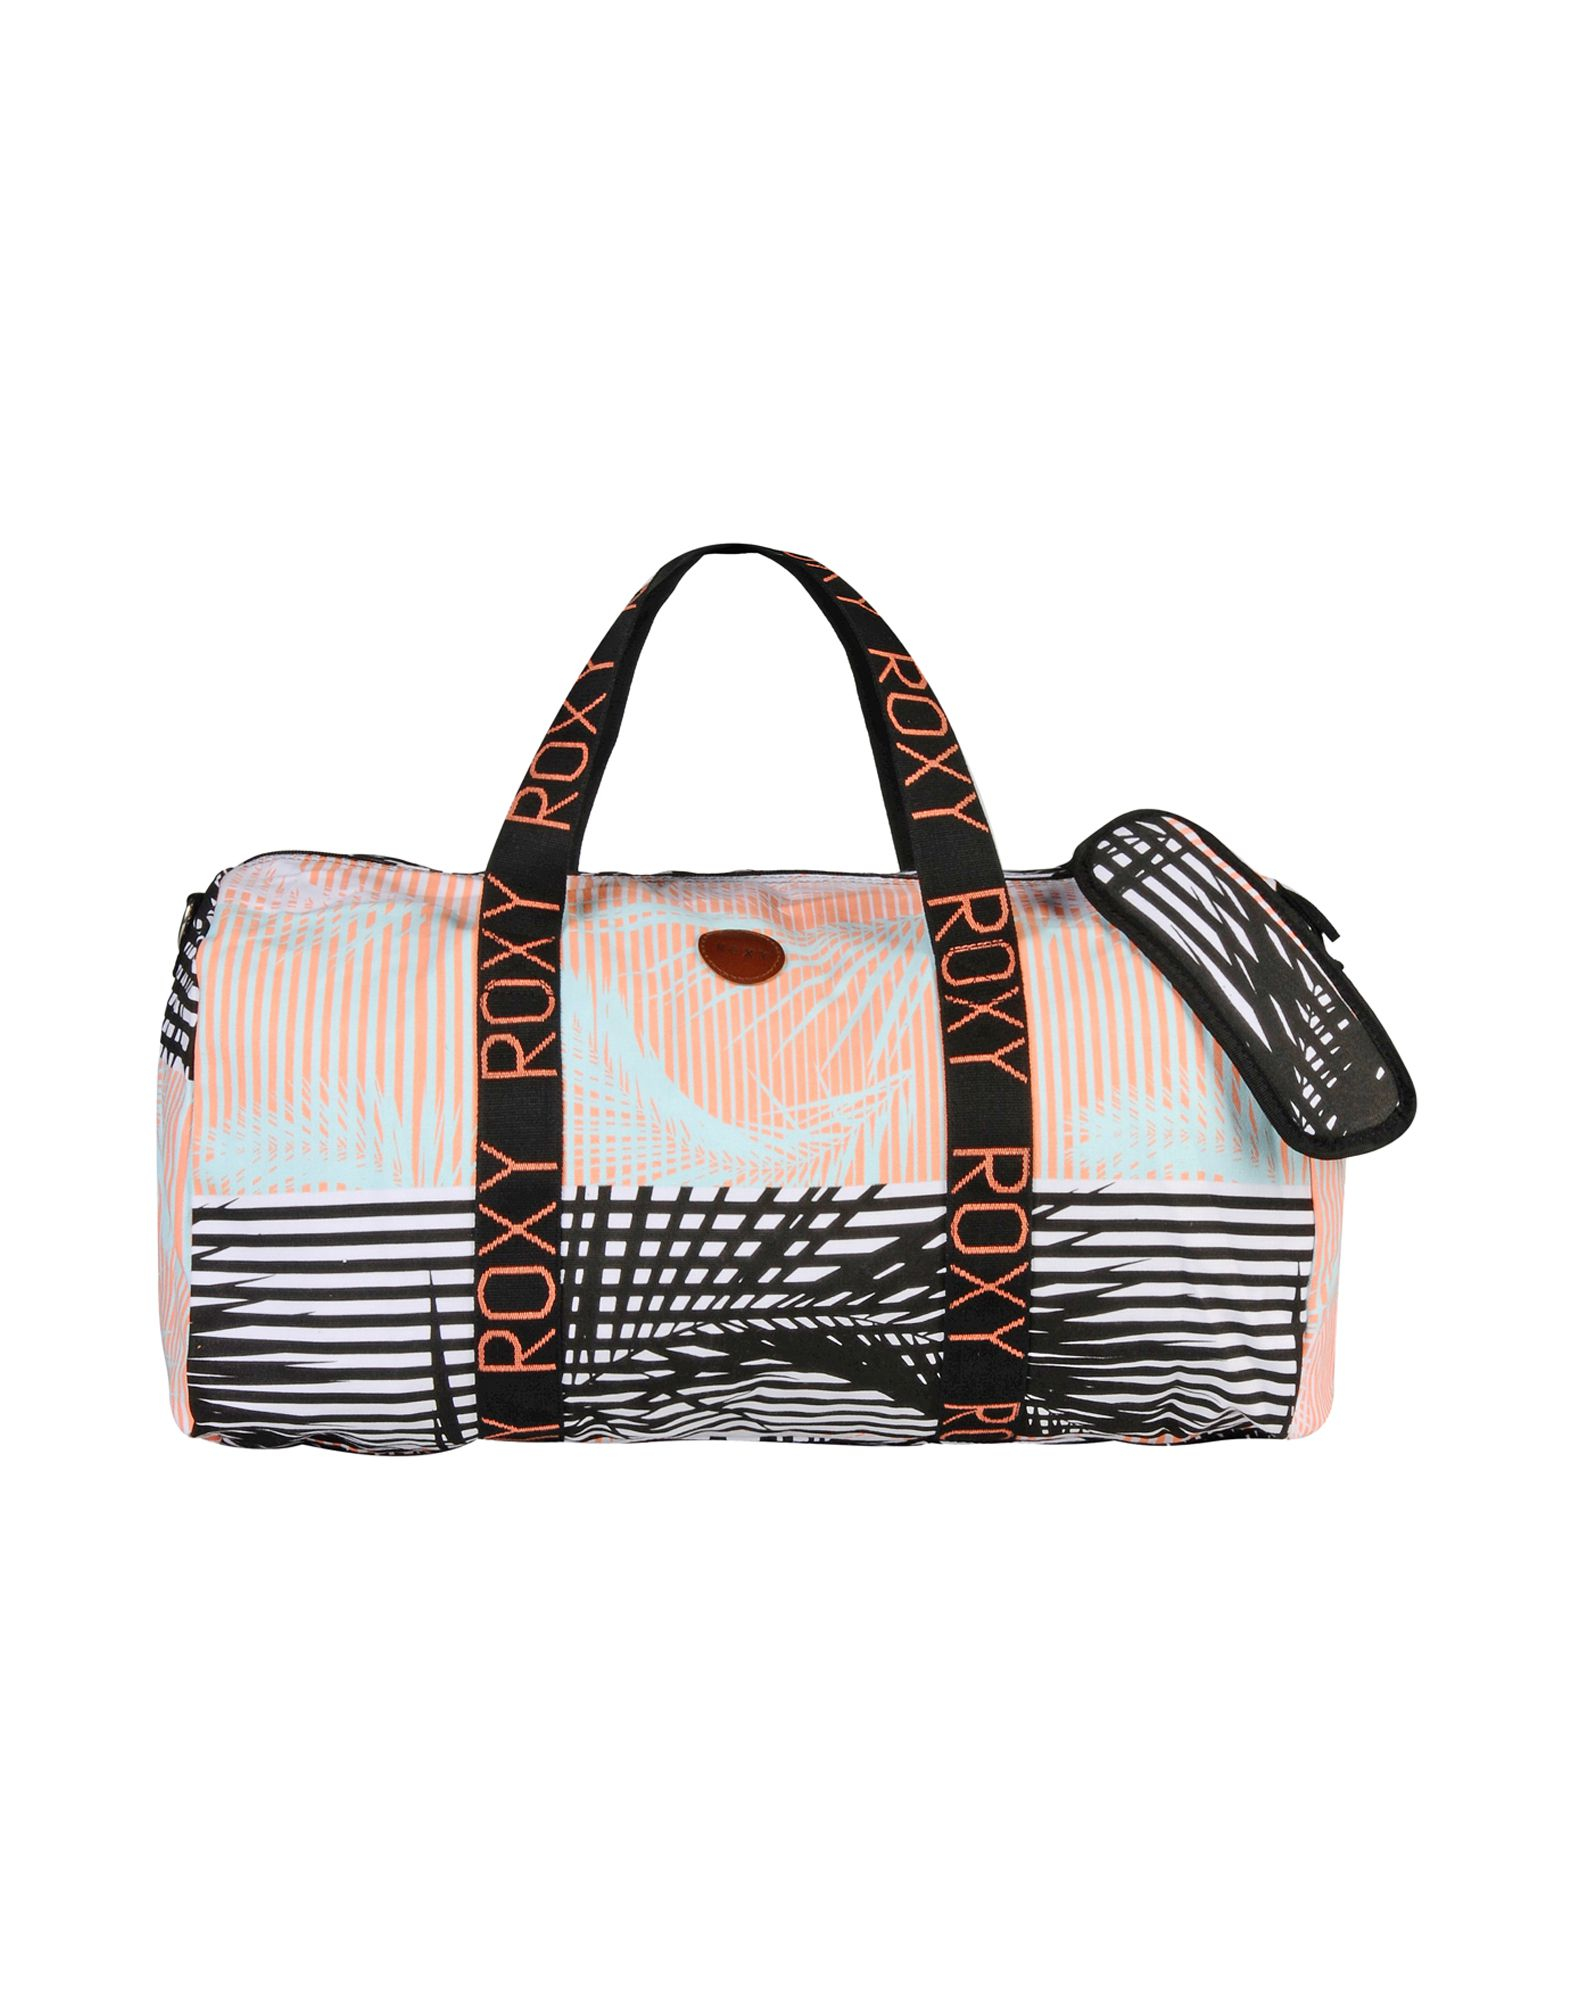 Roxy Canvas Luggage in Salmon Pink (Pink) - Lyst